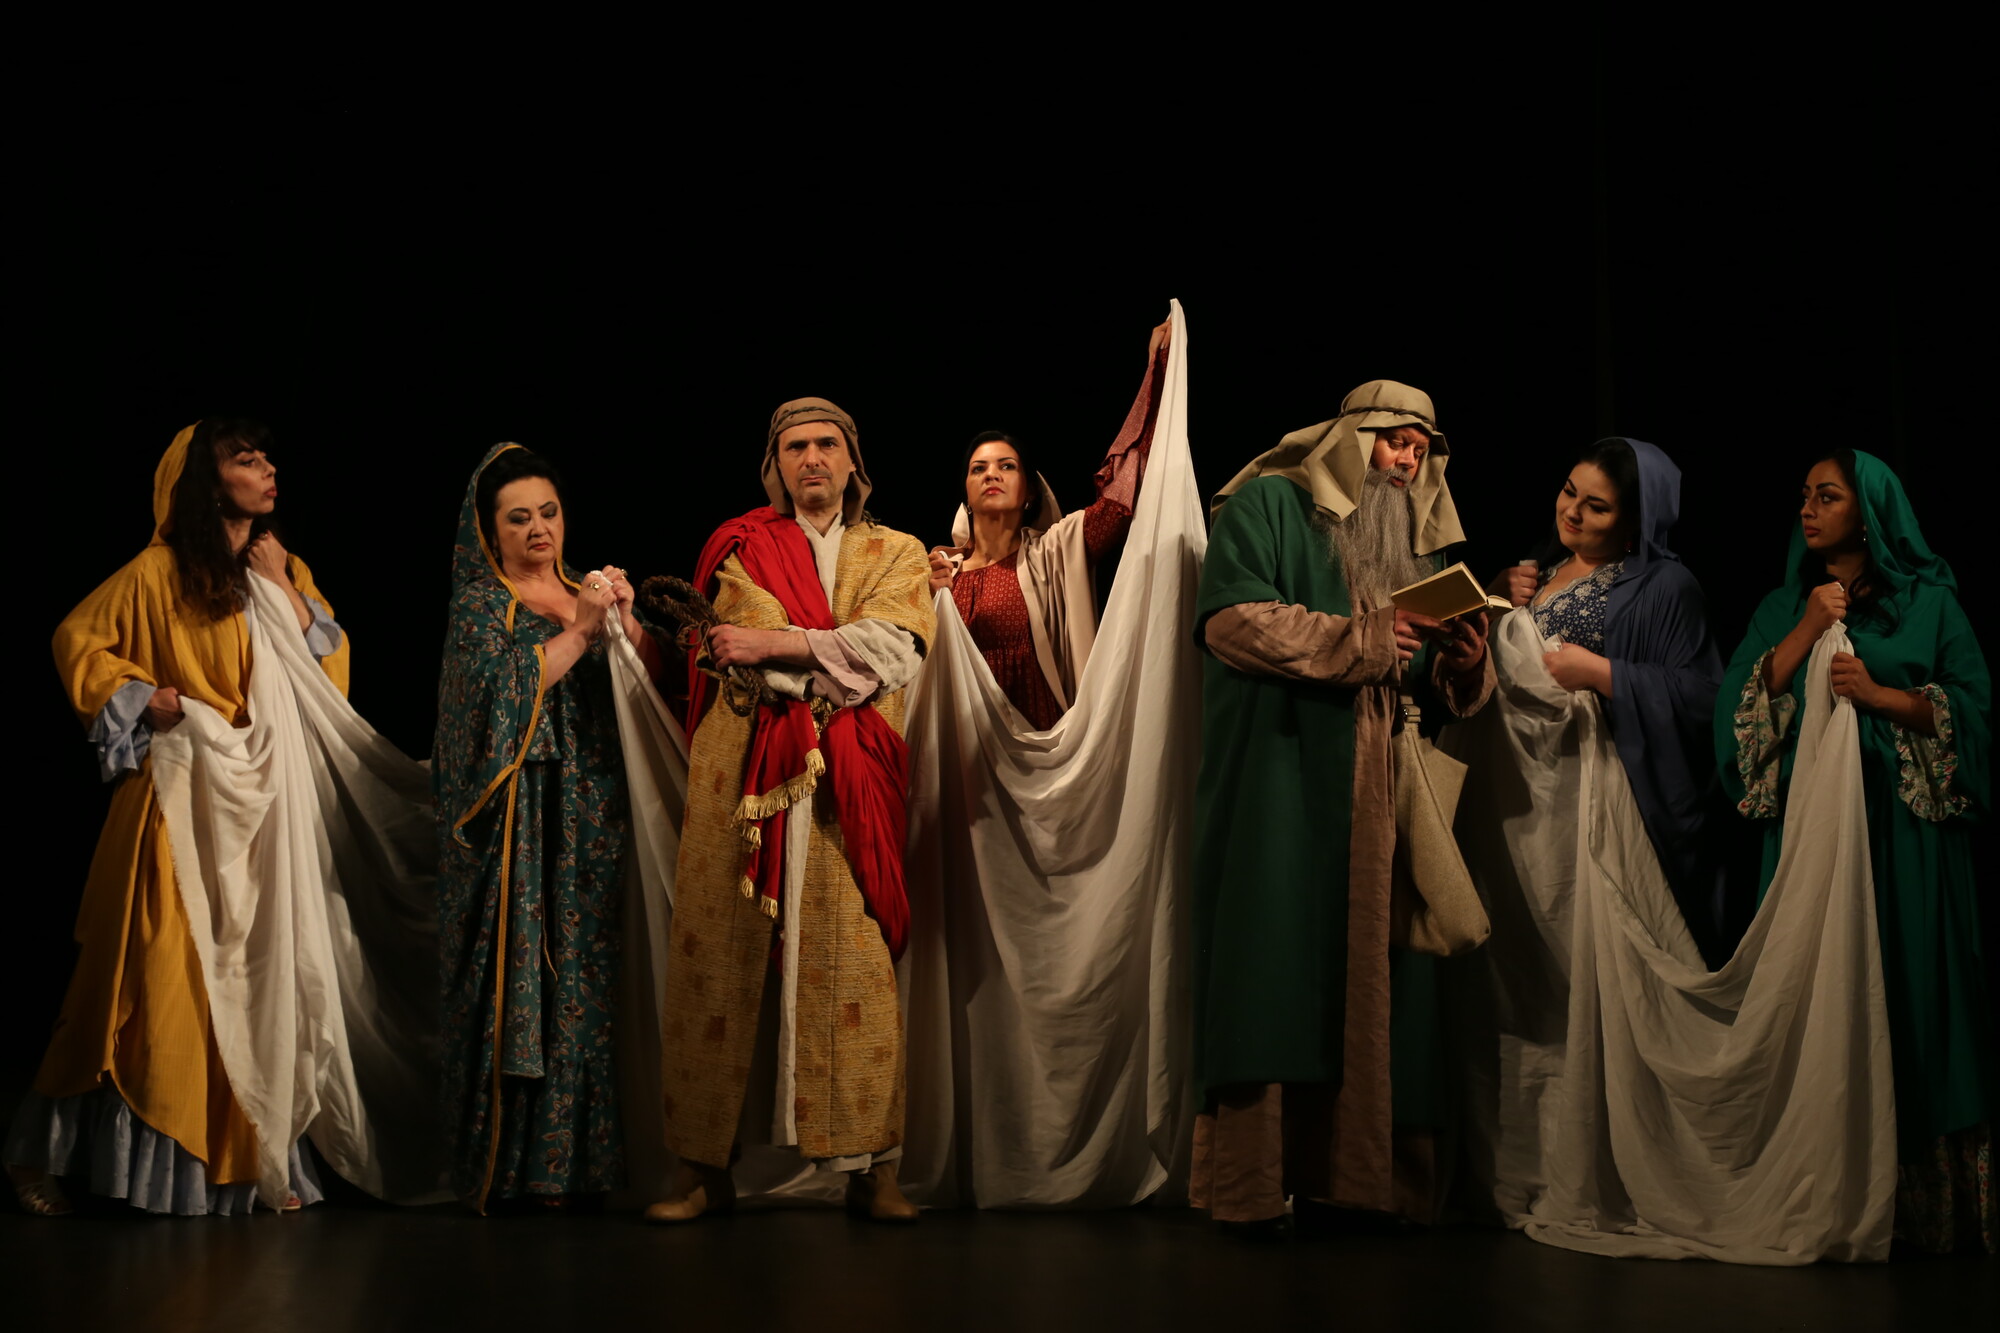 Seven people wearing ancient clothing and holding white cloth.